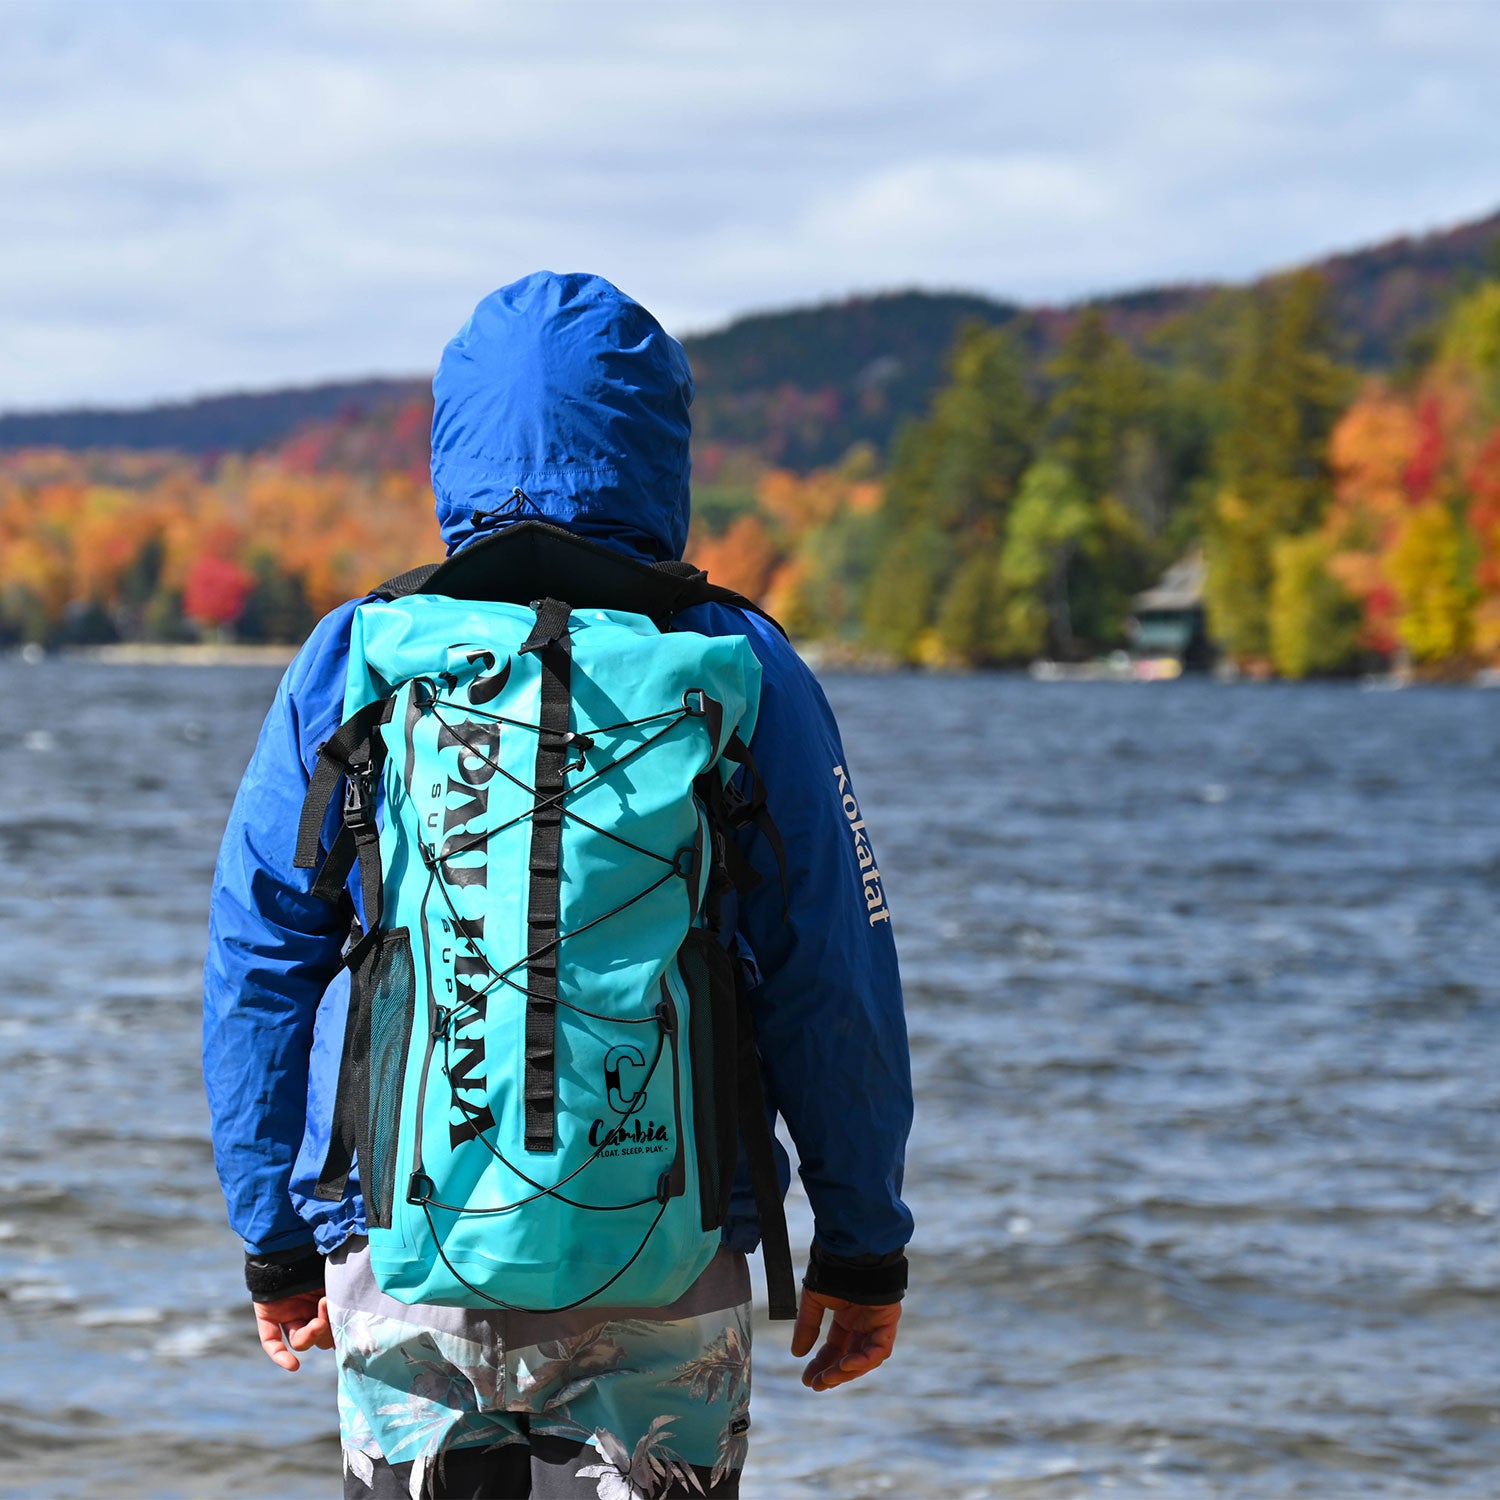 A man standing by a lake with the Cambia backpack on looking out over the water